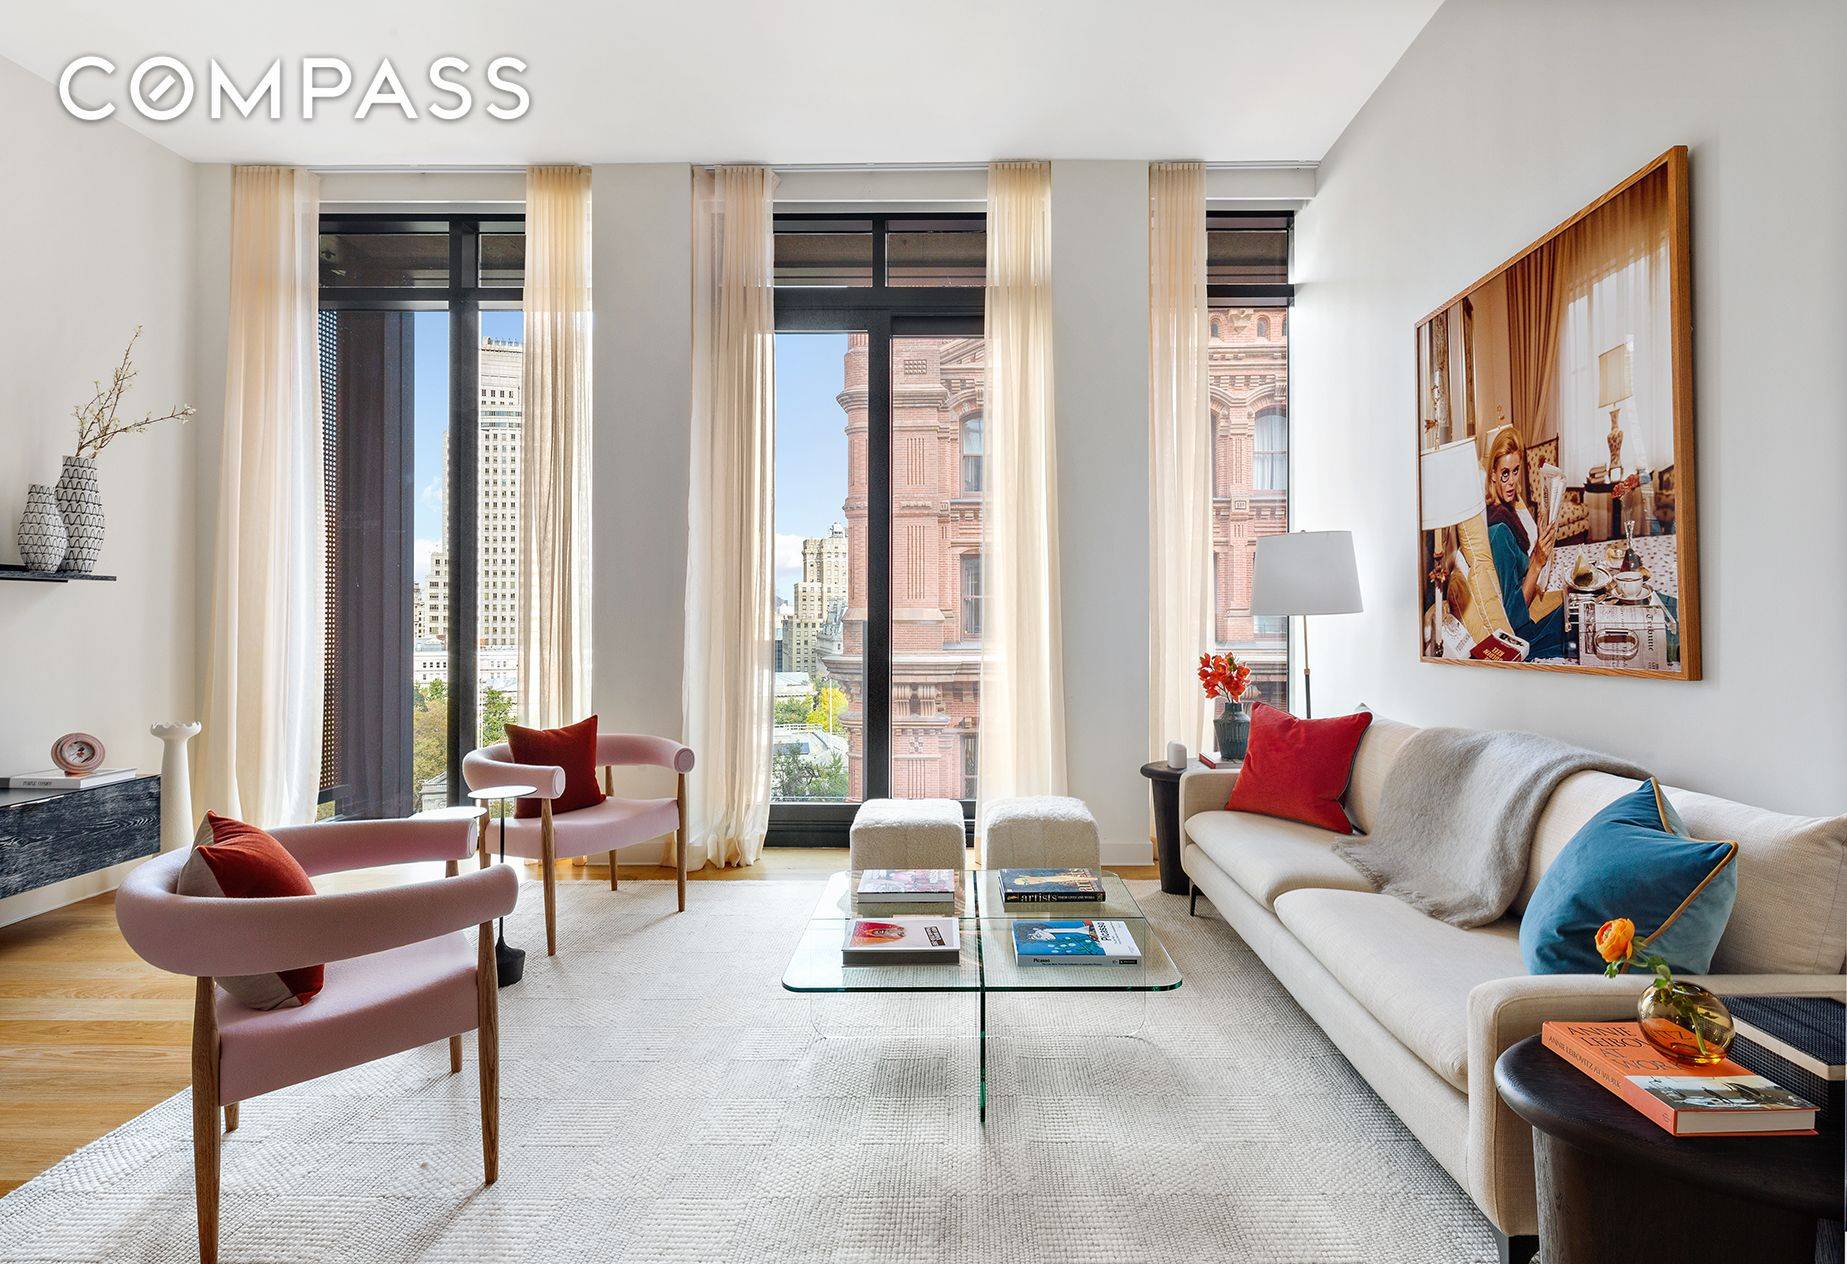 Anticipated Closings Commence First Quarter 2022 The first residential property in New York City by Pritzker Prize winning architect Richard Rogers, Rogers Stirk Harbour Partners.